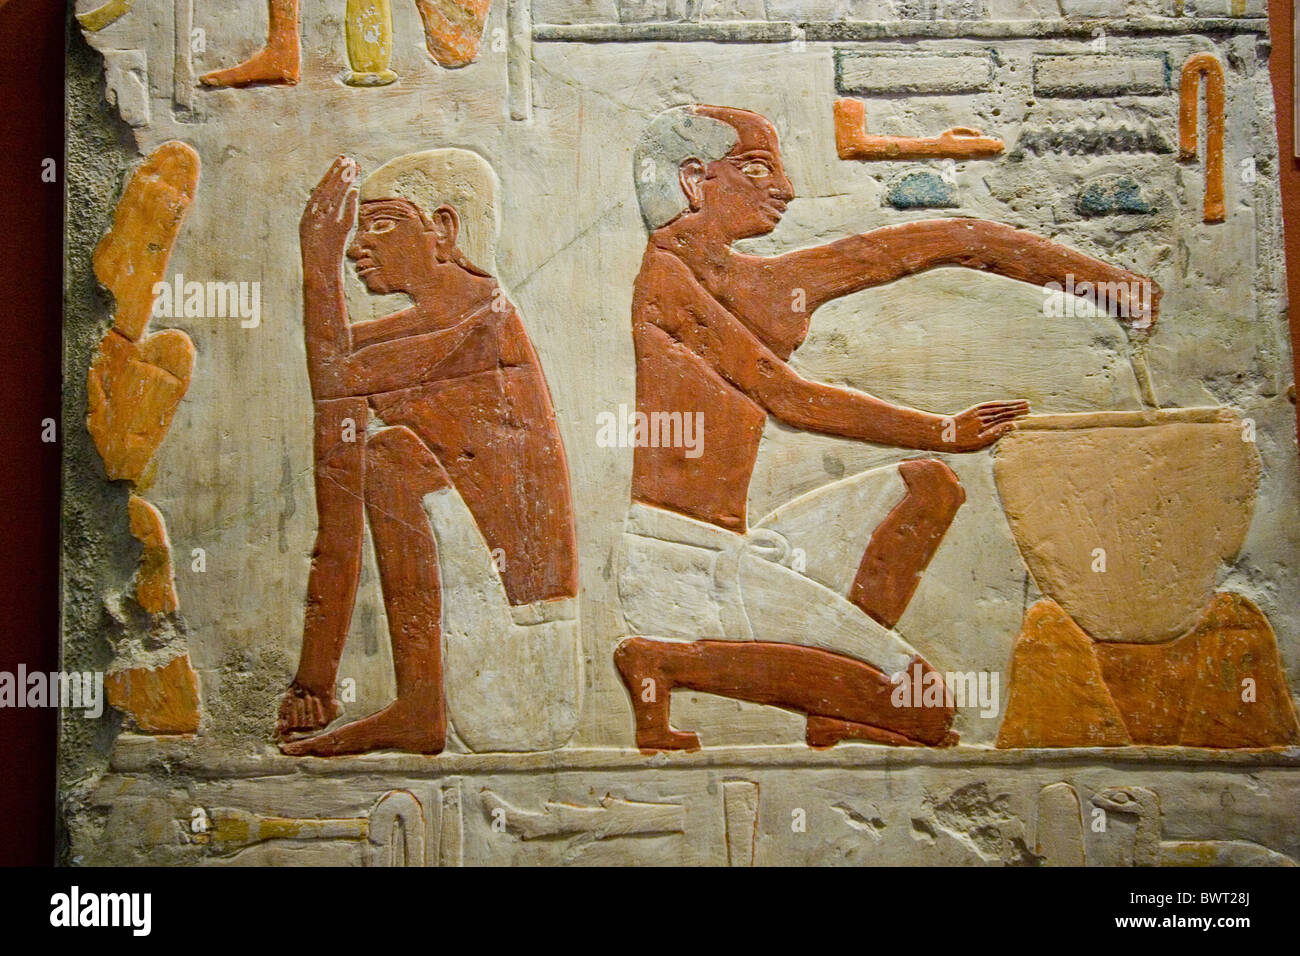 Detail of an ancient Egyptian painting in the Louvre museum, Paris, France Stock Photo